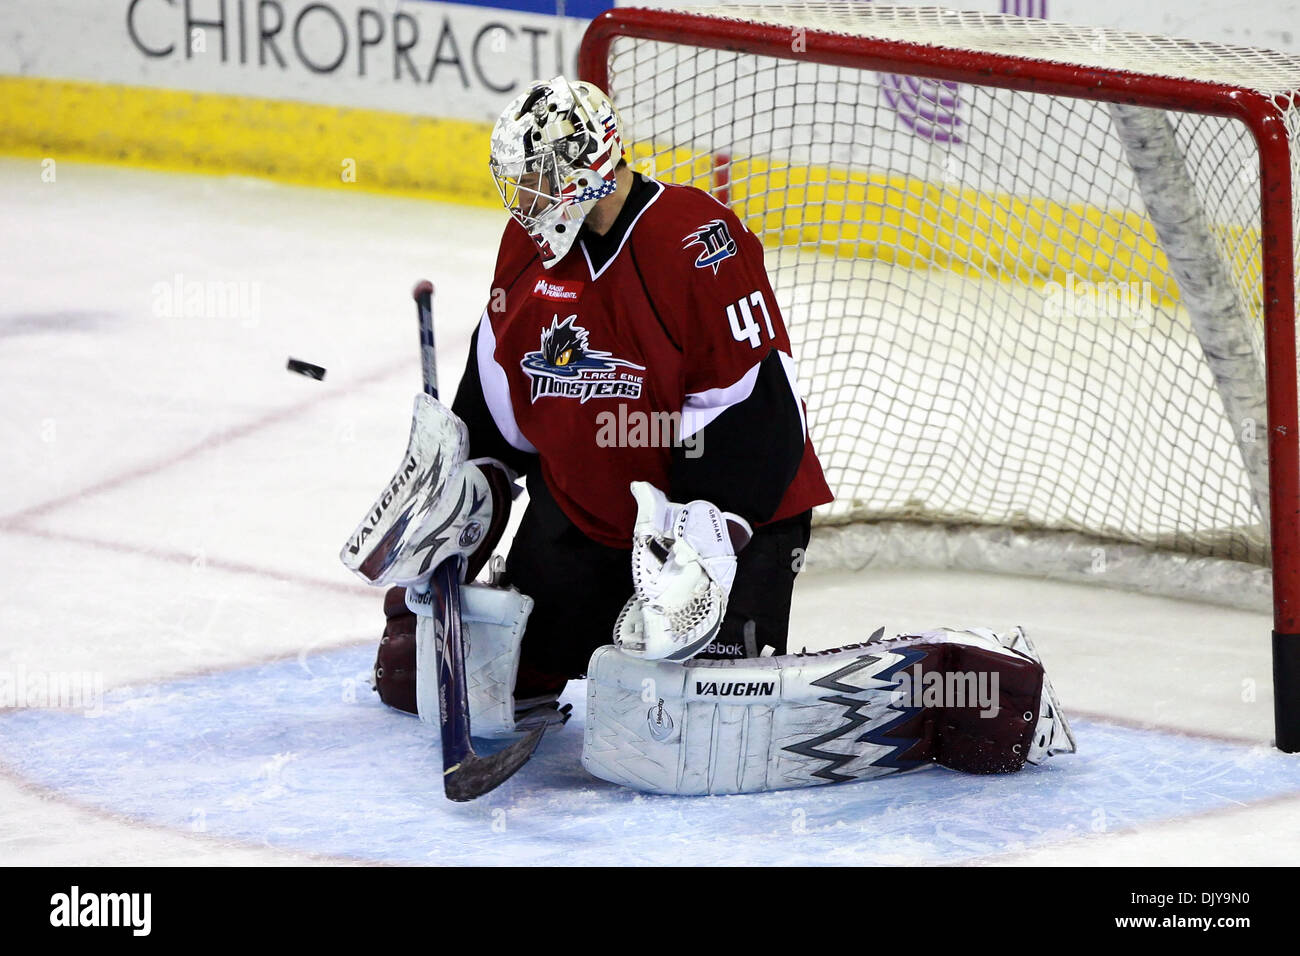 Nov. 24, 2010 - Rockford, Illinois, United States of America - Lake Erie goaltender John Grahame (47) blocks a shot during AHL pregame warmup against the Rockford IceHogs at the MetroCentre in Rockford, Illinois. (Credit Image: © Chris Anderson/Southcreek Global/ZUMAPRESS.com) Stock Photo